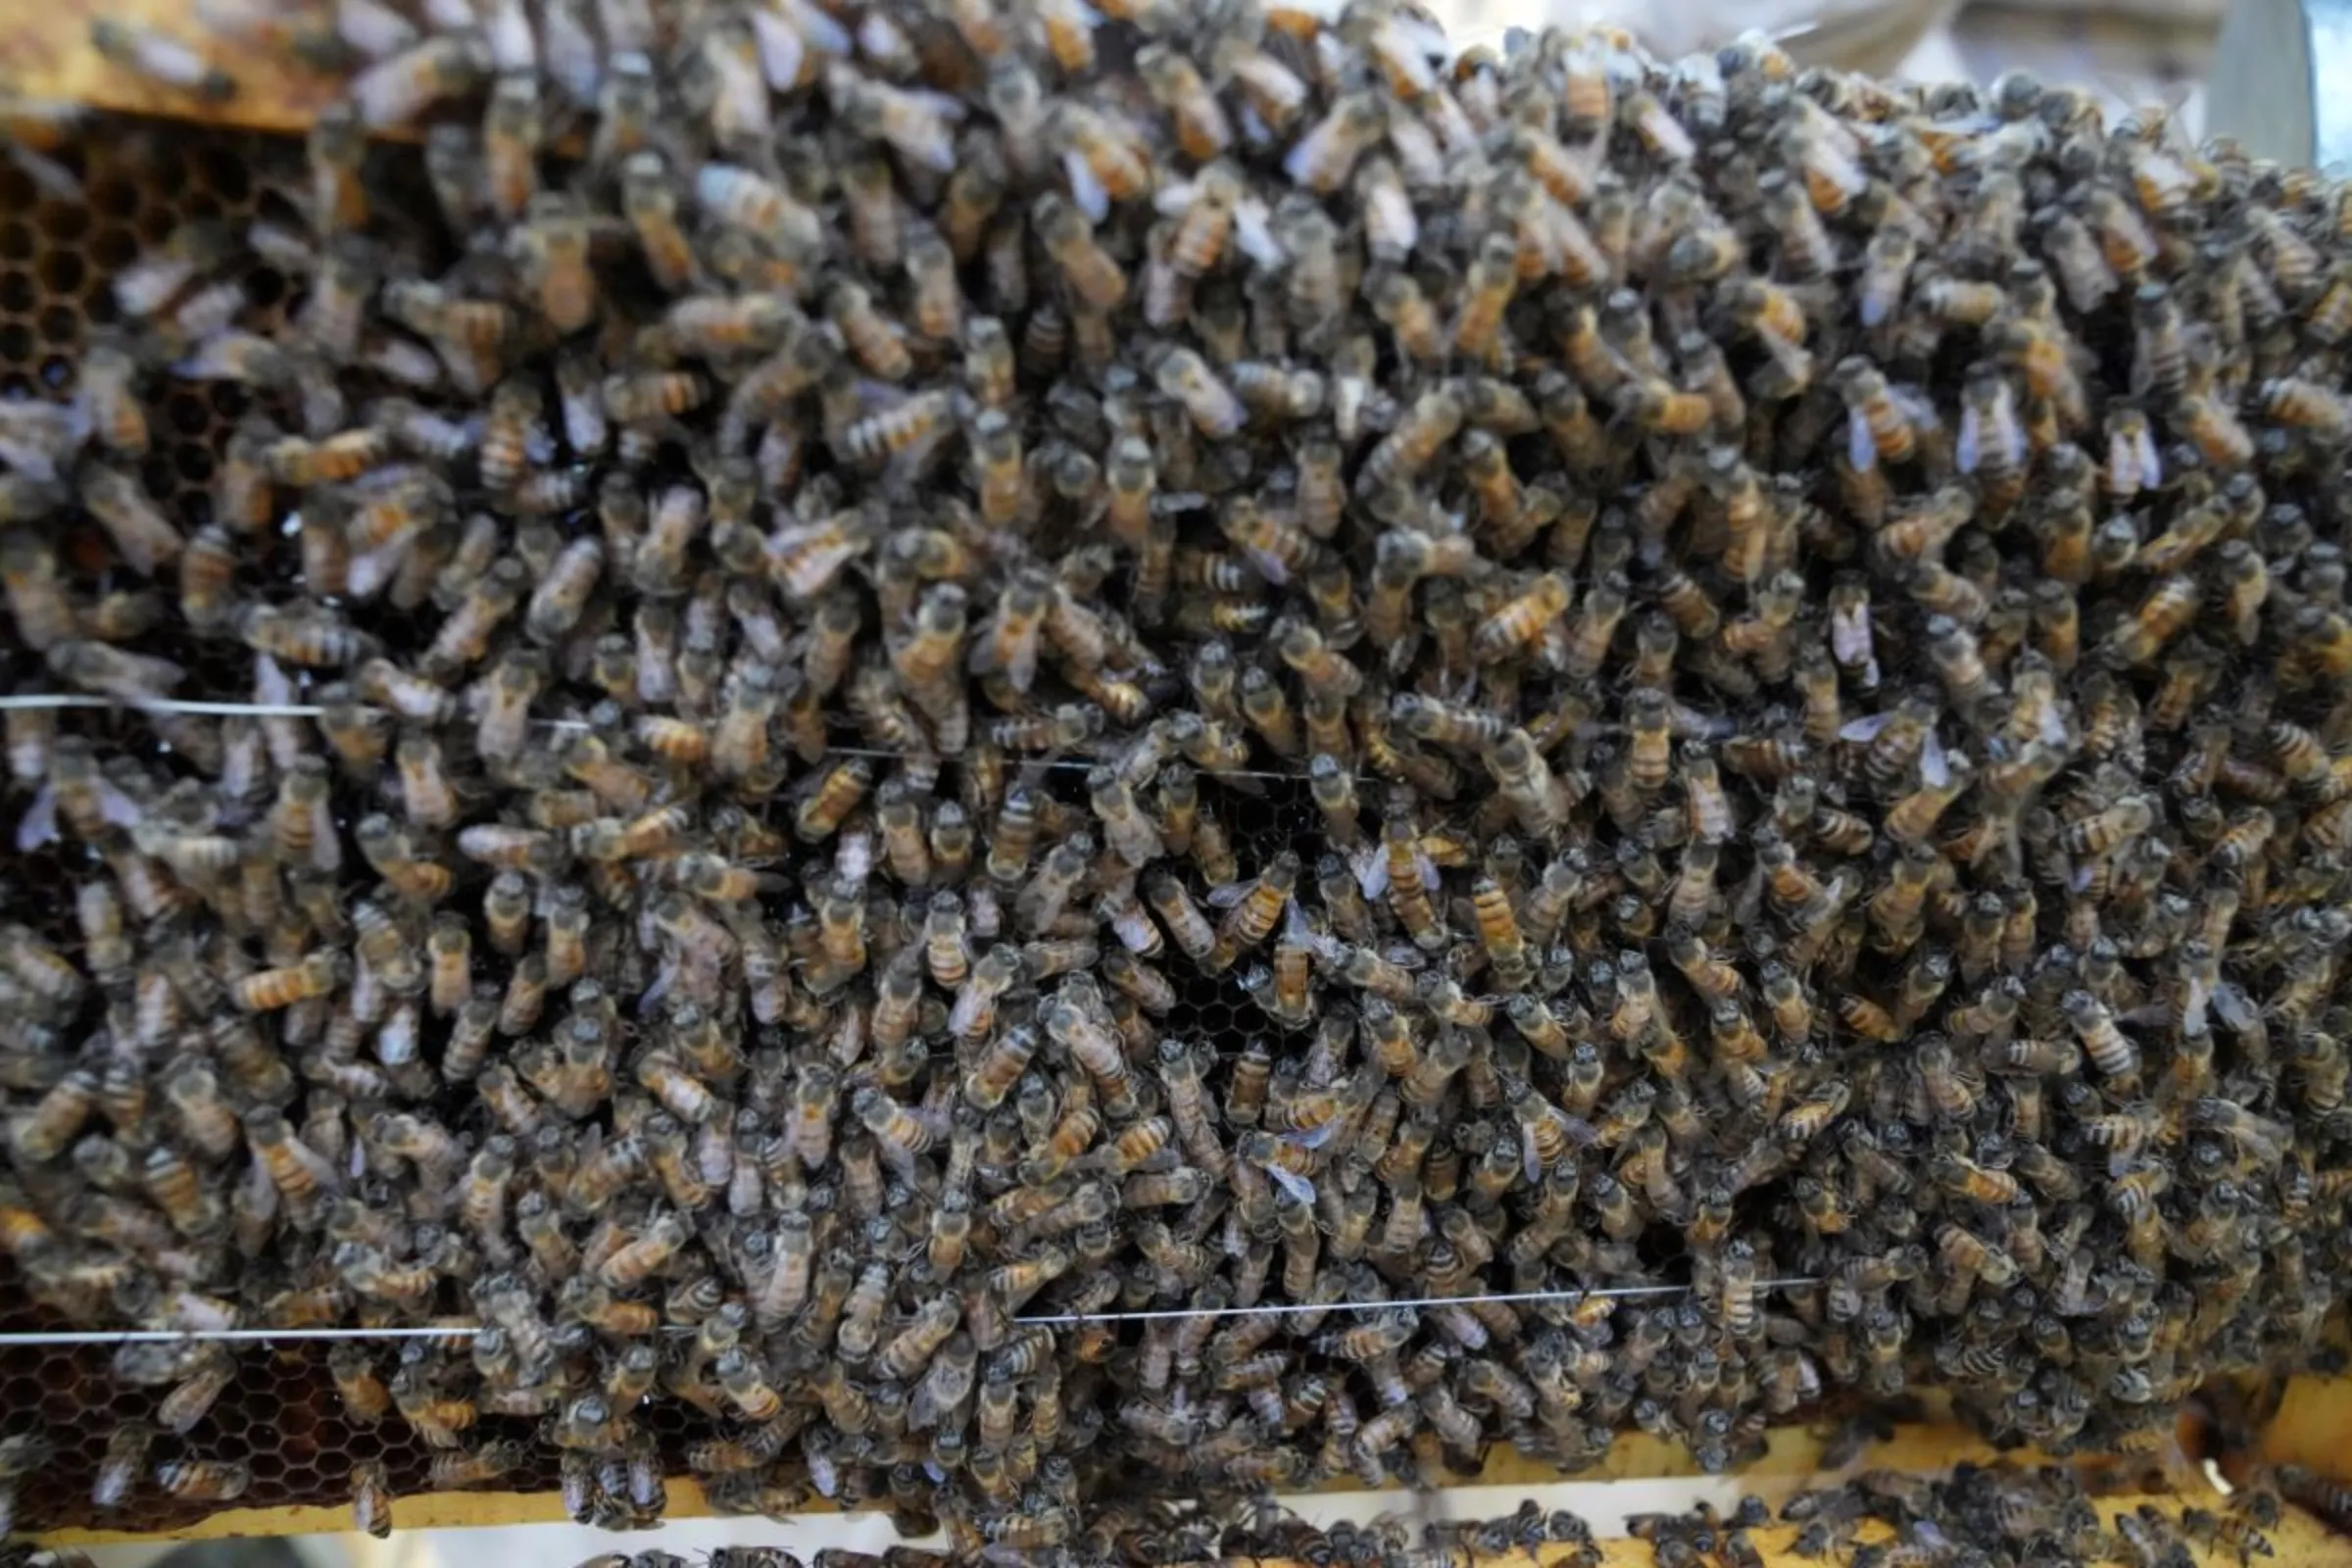 Honey bees in a hive which which forms part of a fence which keeps elephants from straying onto farms near Meru National Park in central Kenya on Feb. 7, 2024. THOMSON REUTERS FOUNDATION/STRINGER